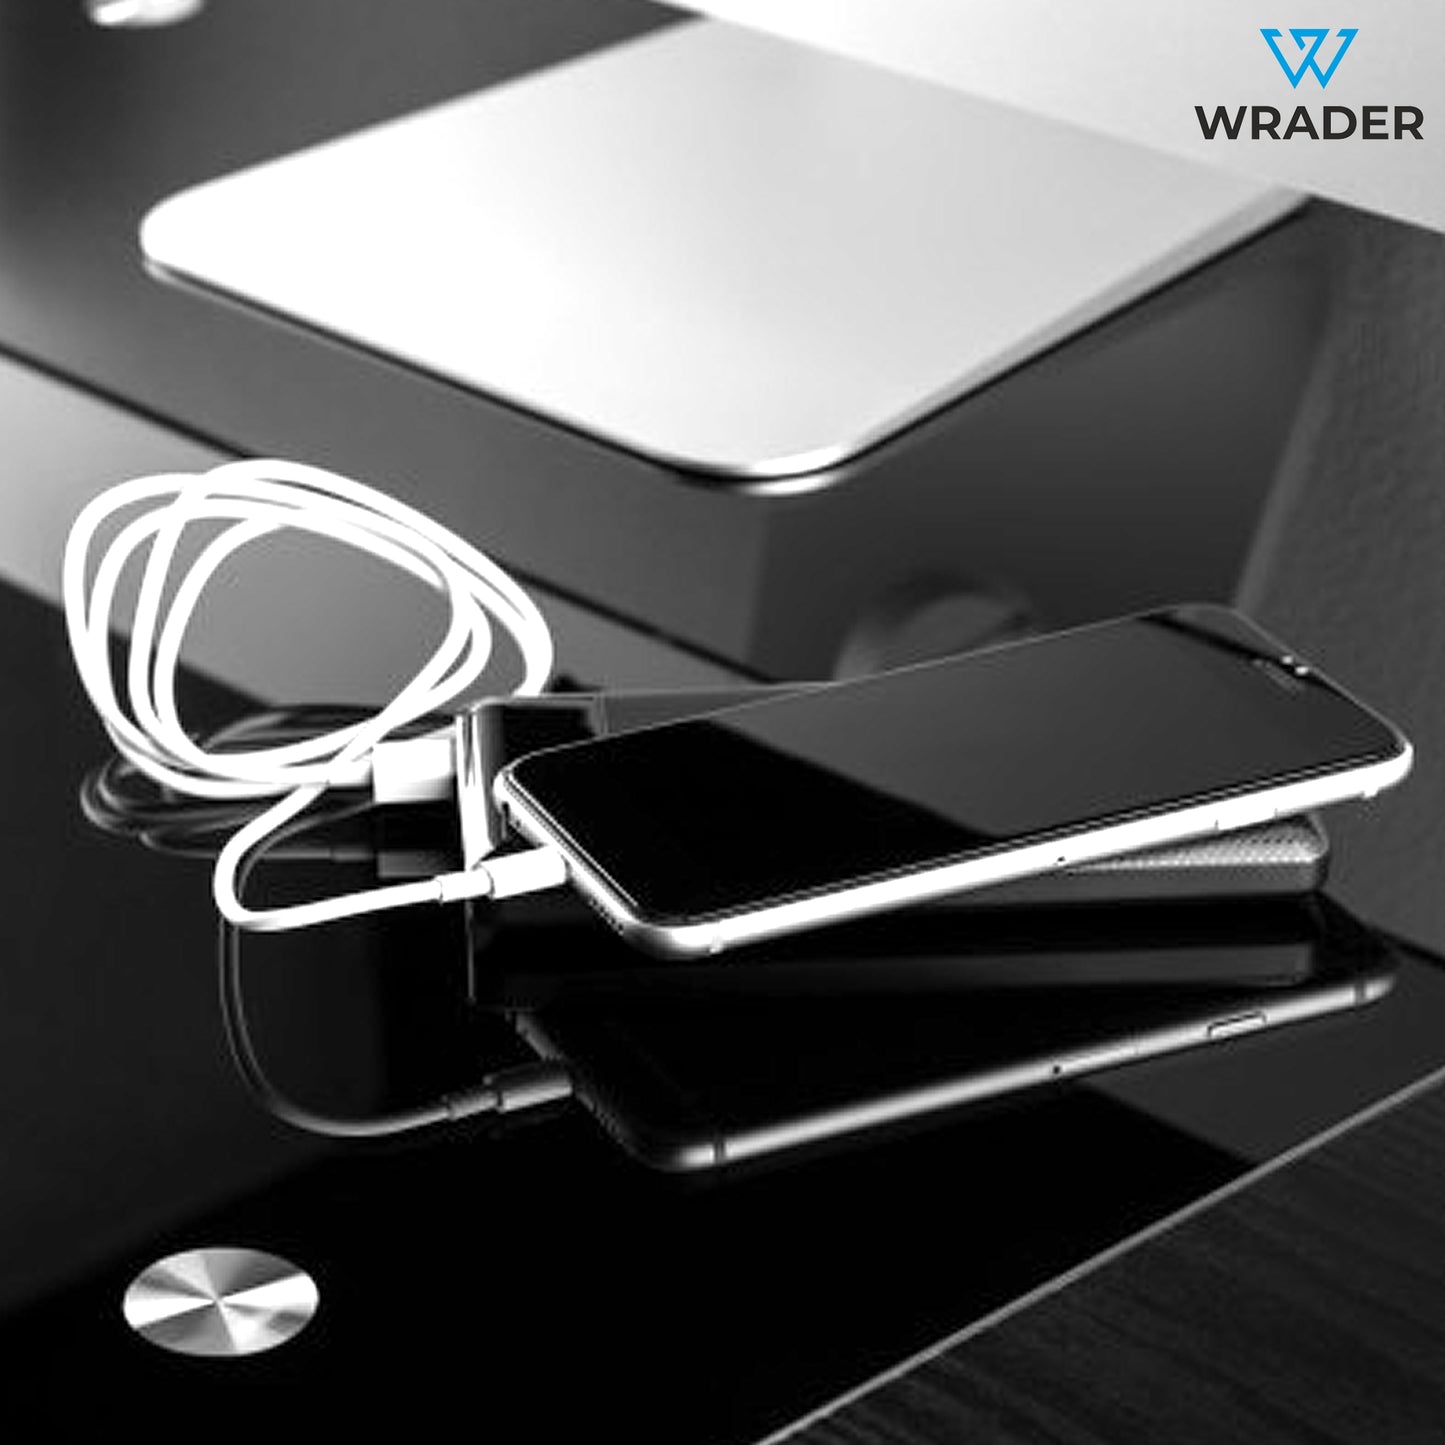 WRADER Lightning Cable 1 m iphone Fast Charging Lightning Port Cable for IPads, IPod, IPhone 10 / XR/Xs/Xs Max/X / 8/8 Plus / 7/7 Plus / 8/8 Plus / 7/7 Plus and All Other Models  (Compatible with Iphone, Ipad, Ipod, iOS, White, One Cable)